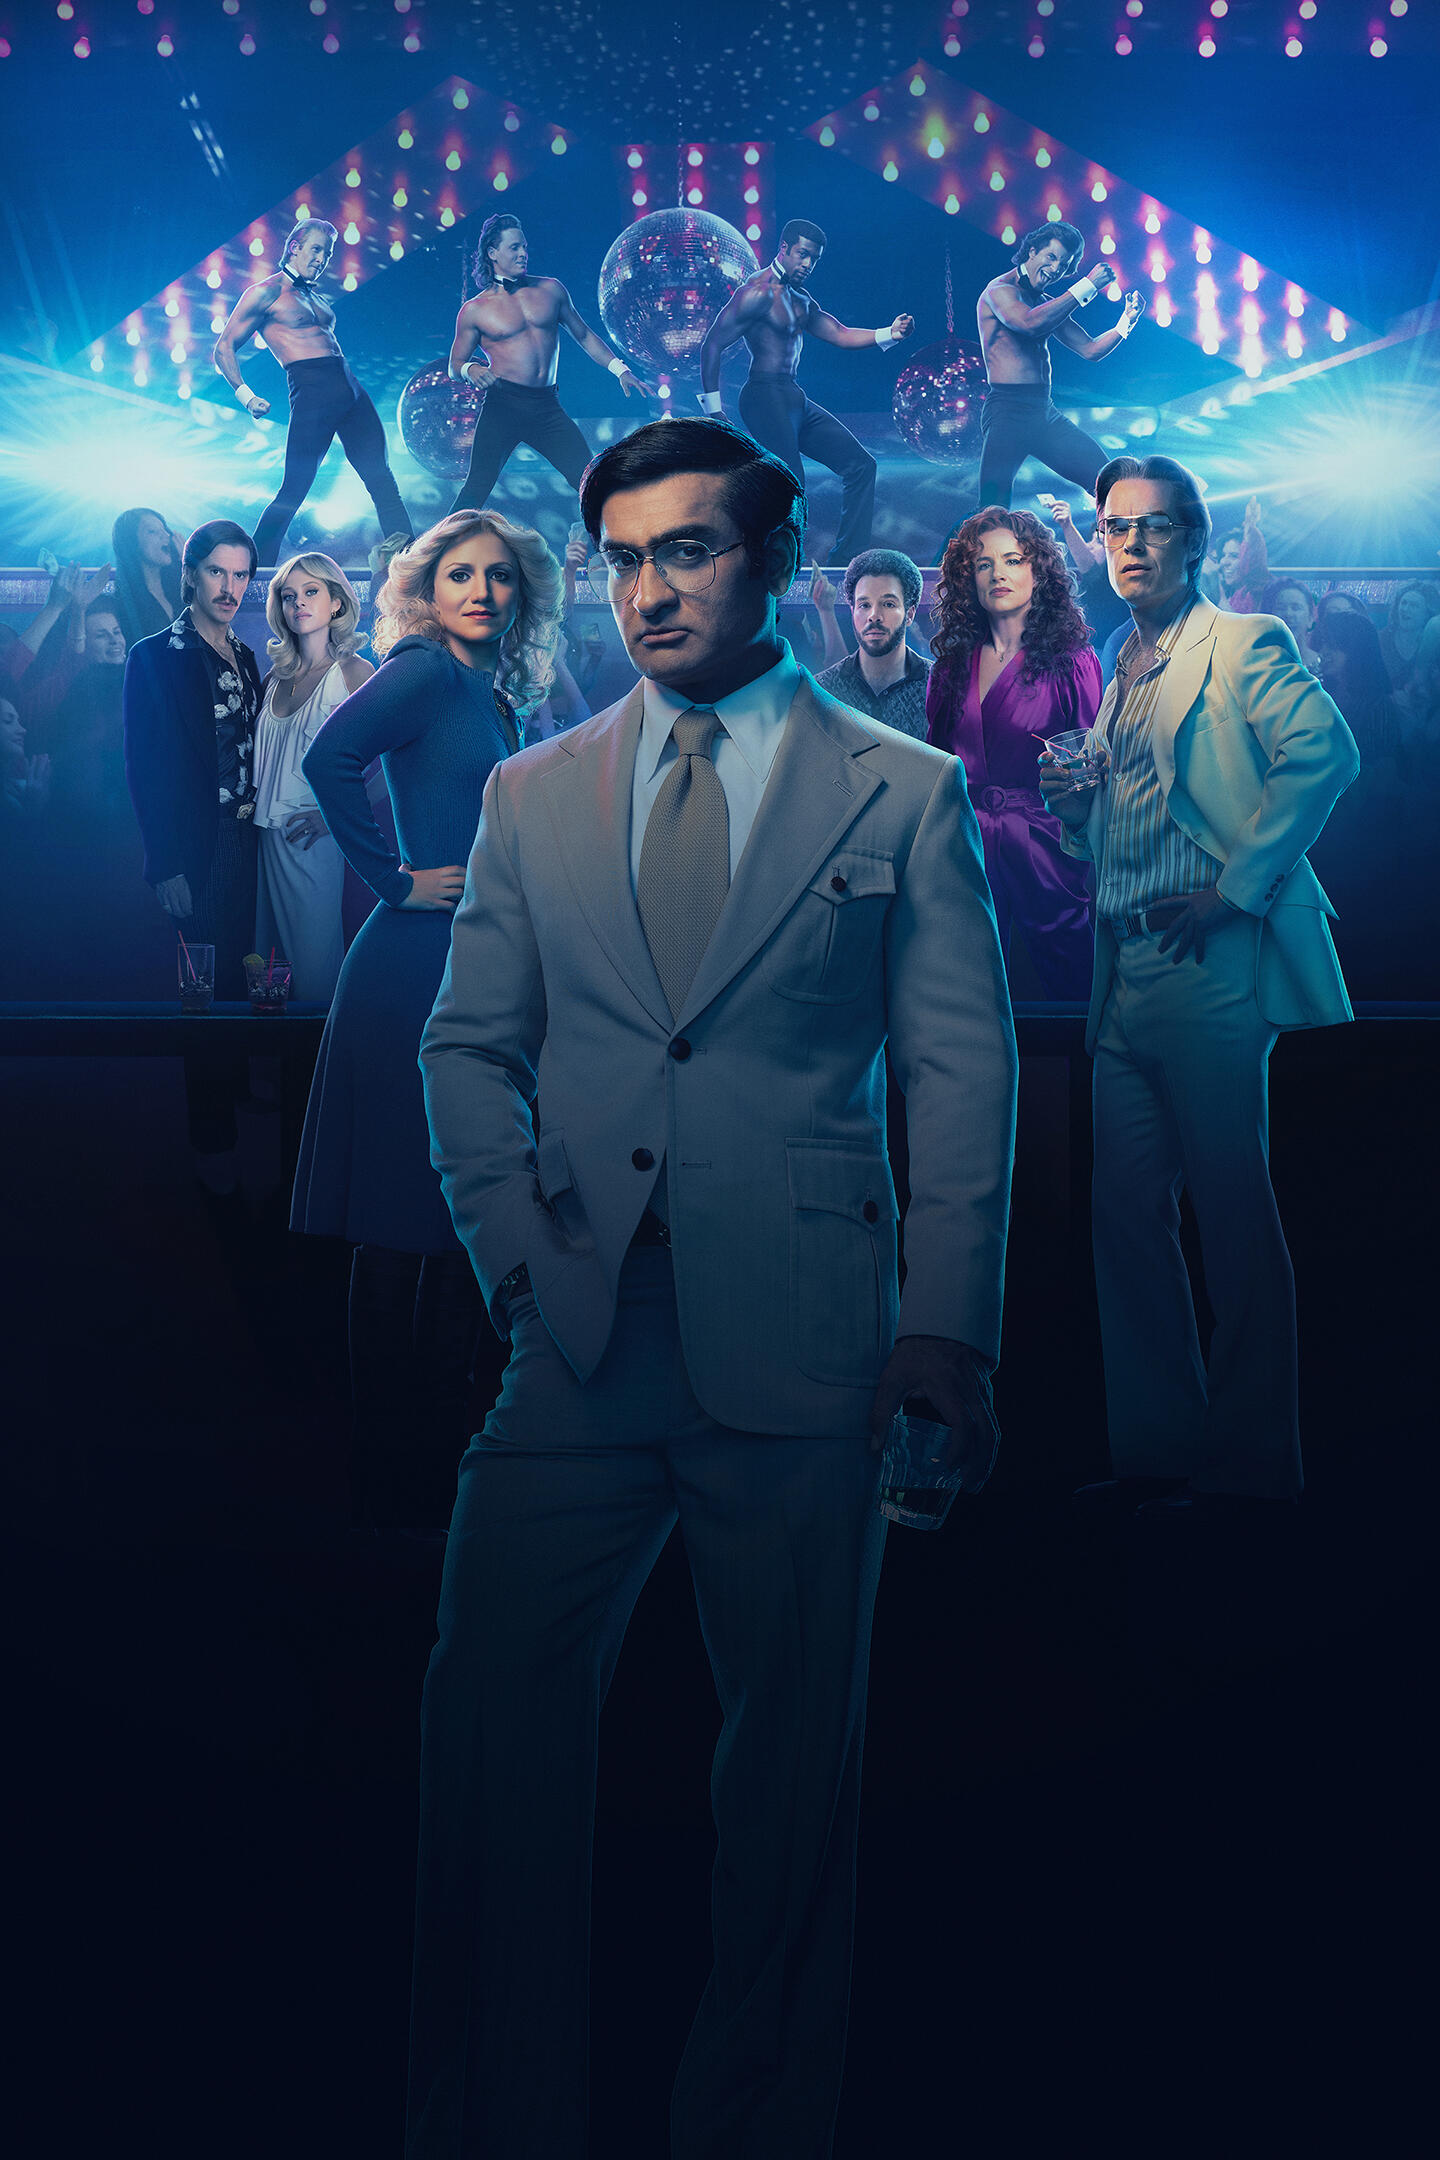 Welcome to Chippendales -- A sprawling true-crime saga, “Welcome to Chippendales” tells the outrageous story of Somen “Steve” Banerjee, an Indian immigrant who became the unlikely founder of the world’s greatest male-stripping empire—and let nothing stand in his way in the process. (Courtesy of Hulu)